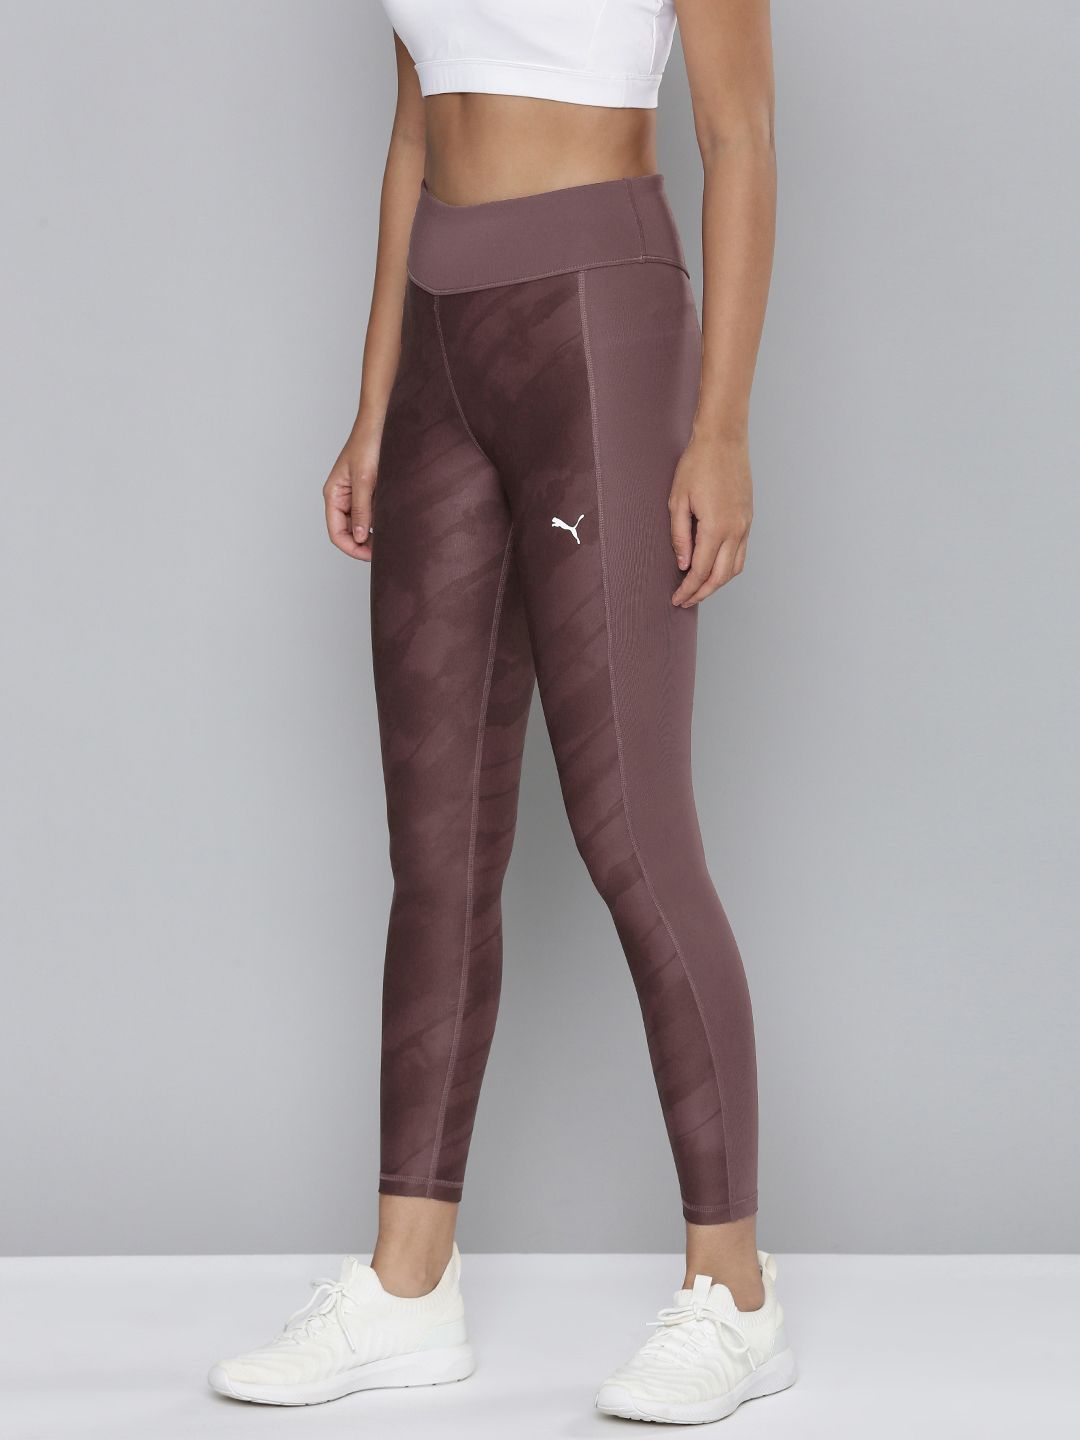 Puma Women Mauve Favourite Printed High Waist dryCELL 7/8 Training Tights Price in India